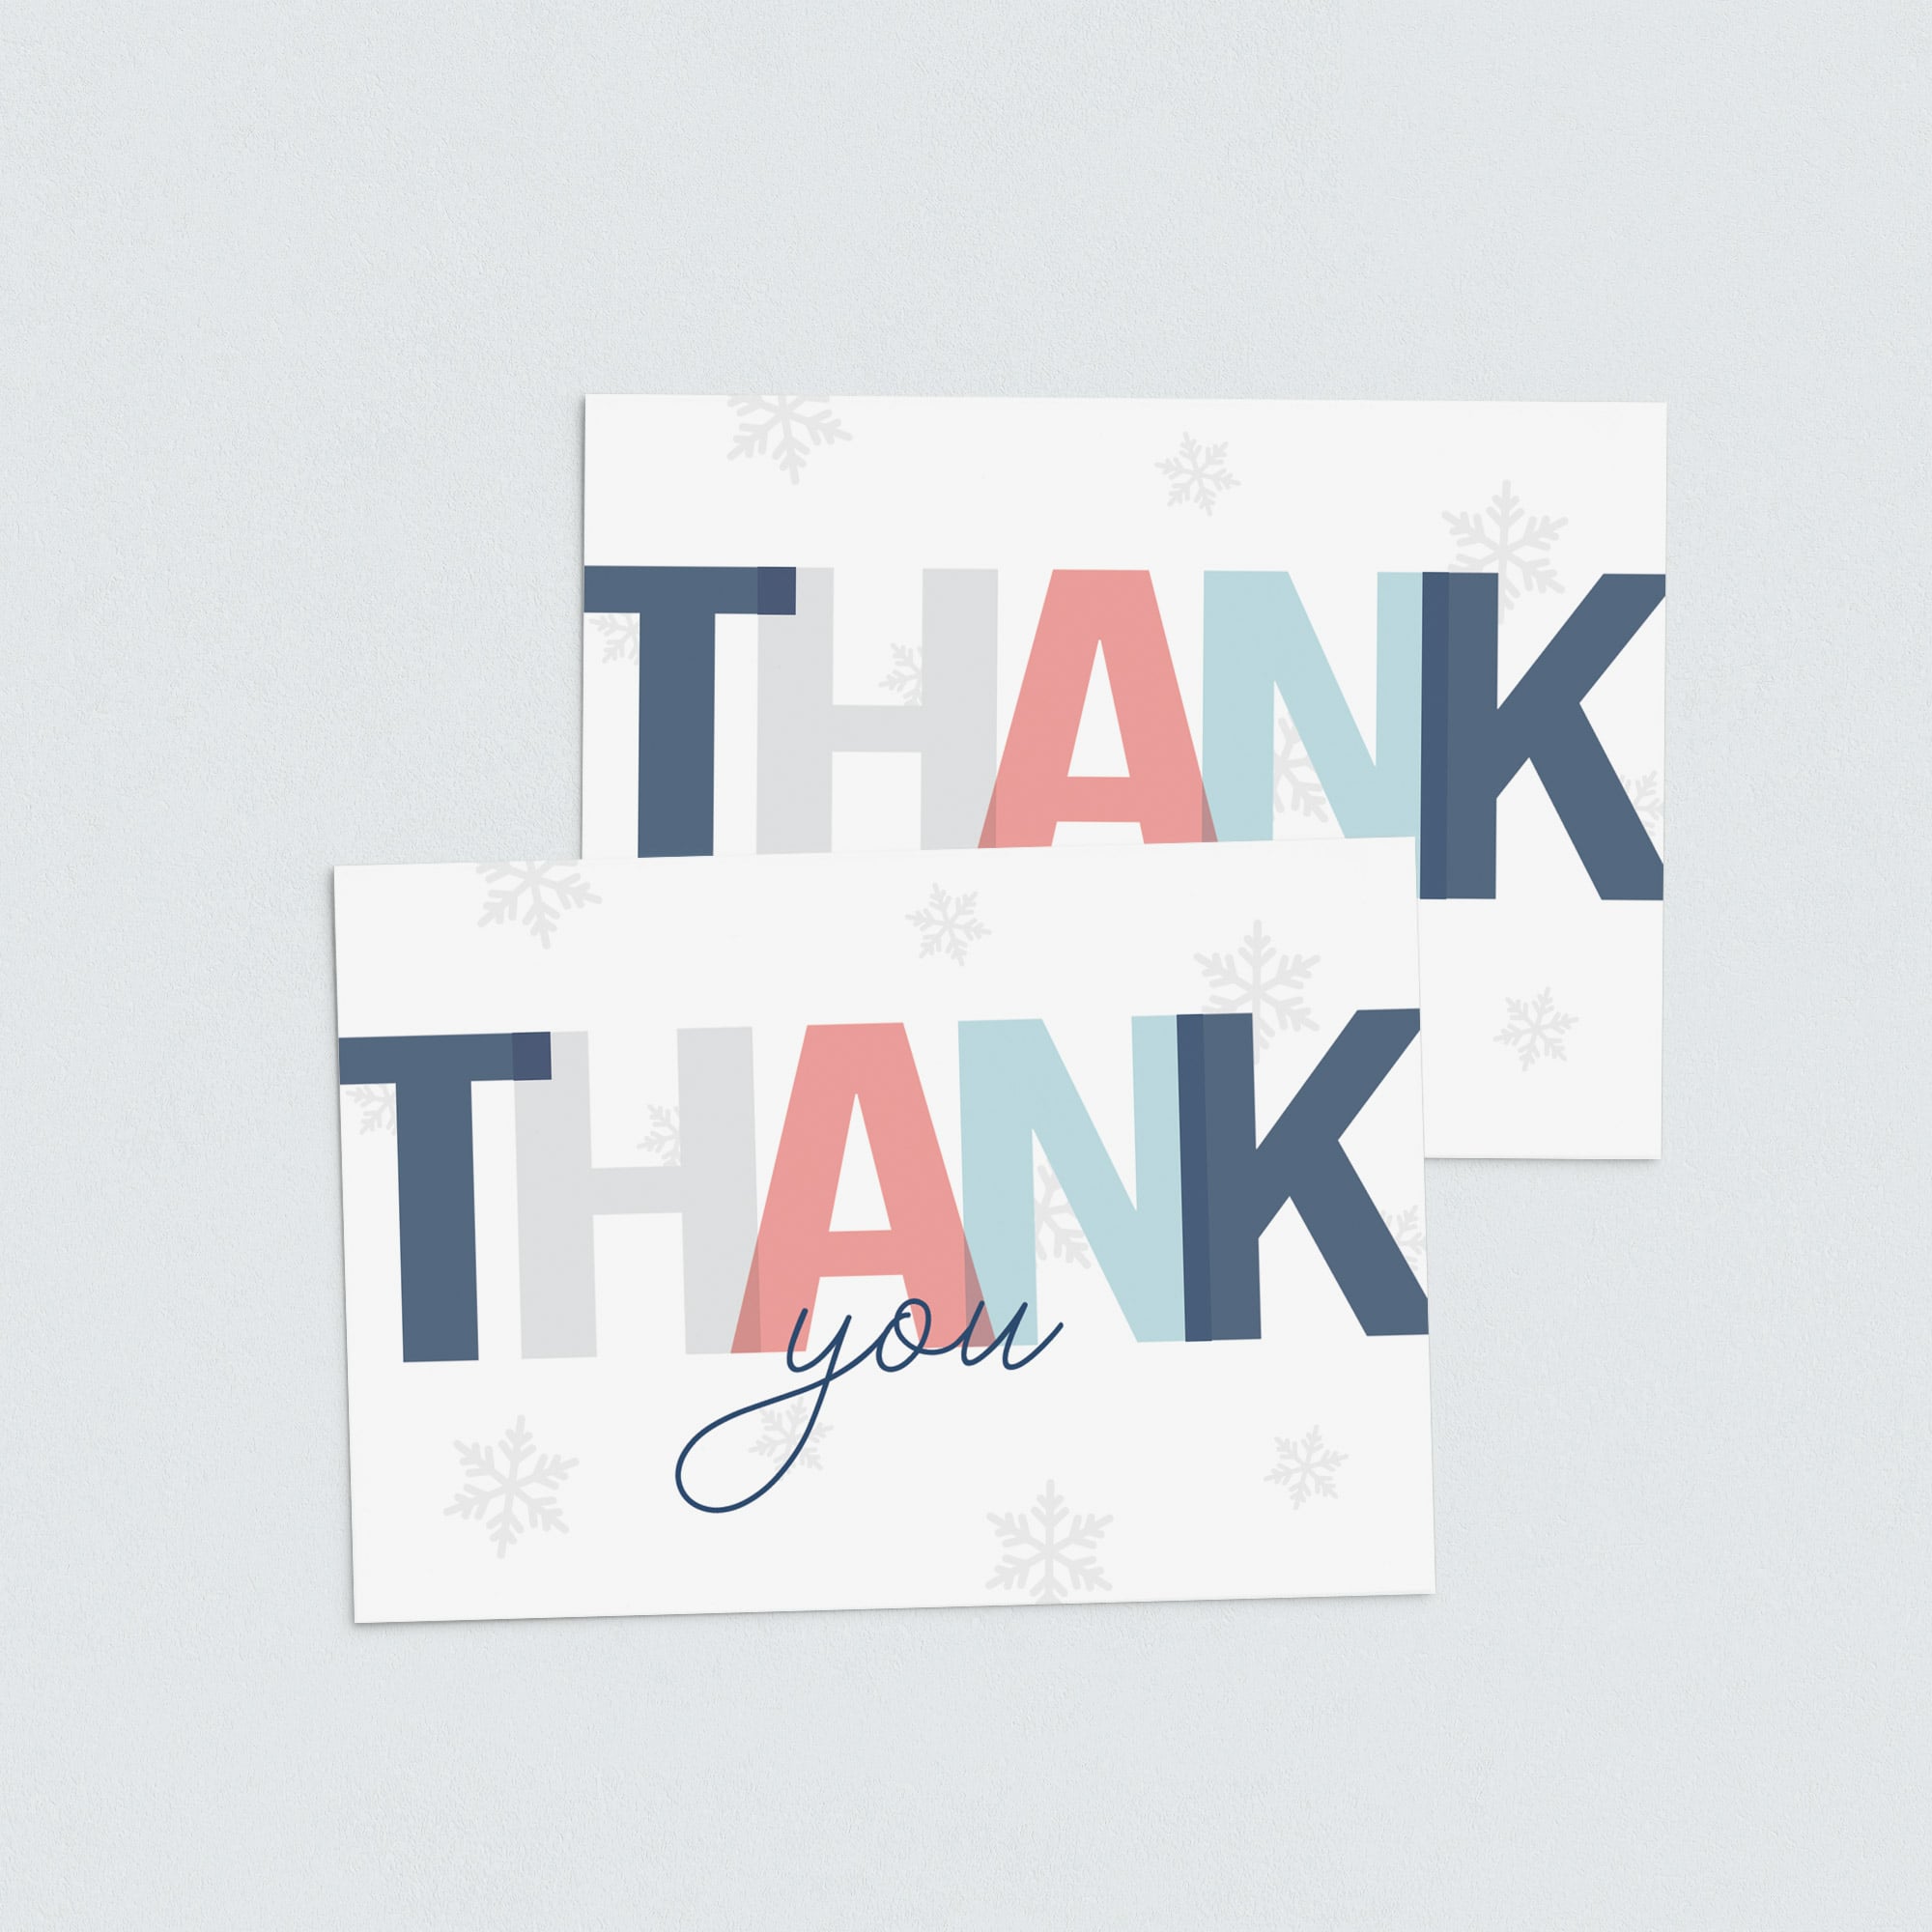 Printable winter themed thank you cards by LittleSizzle